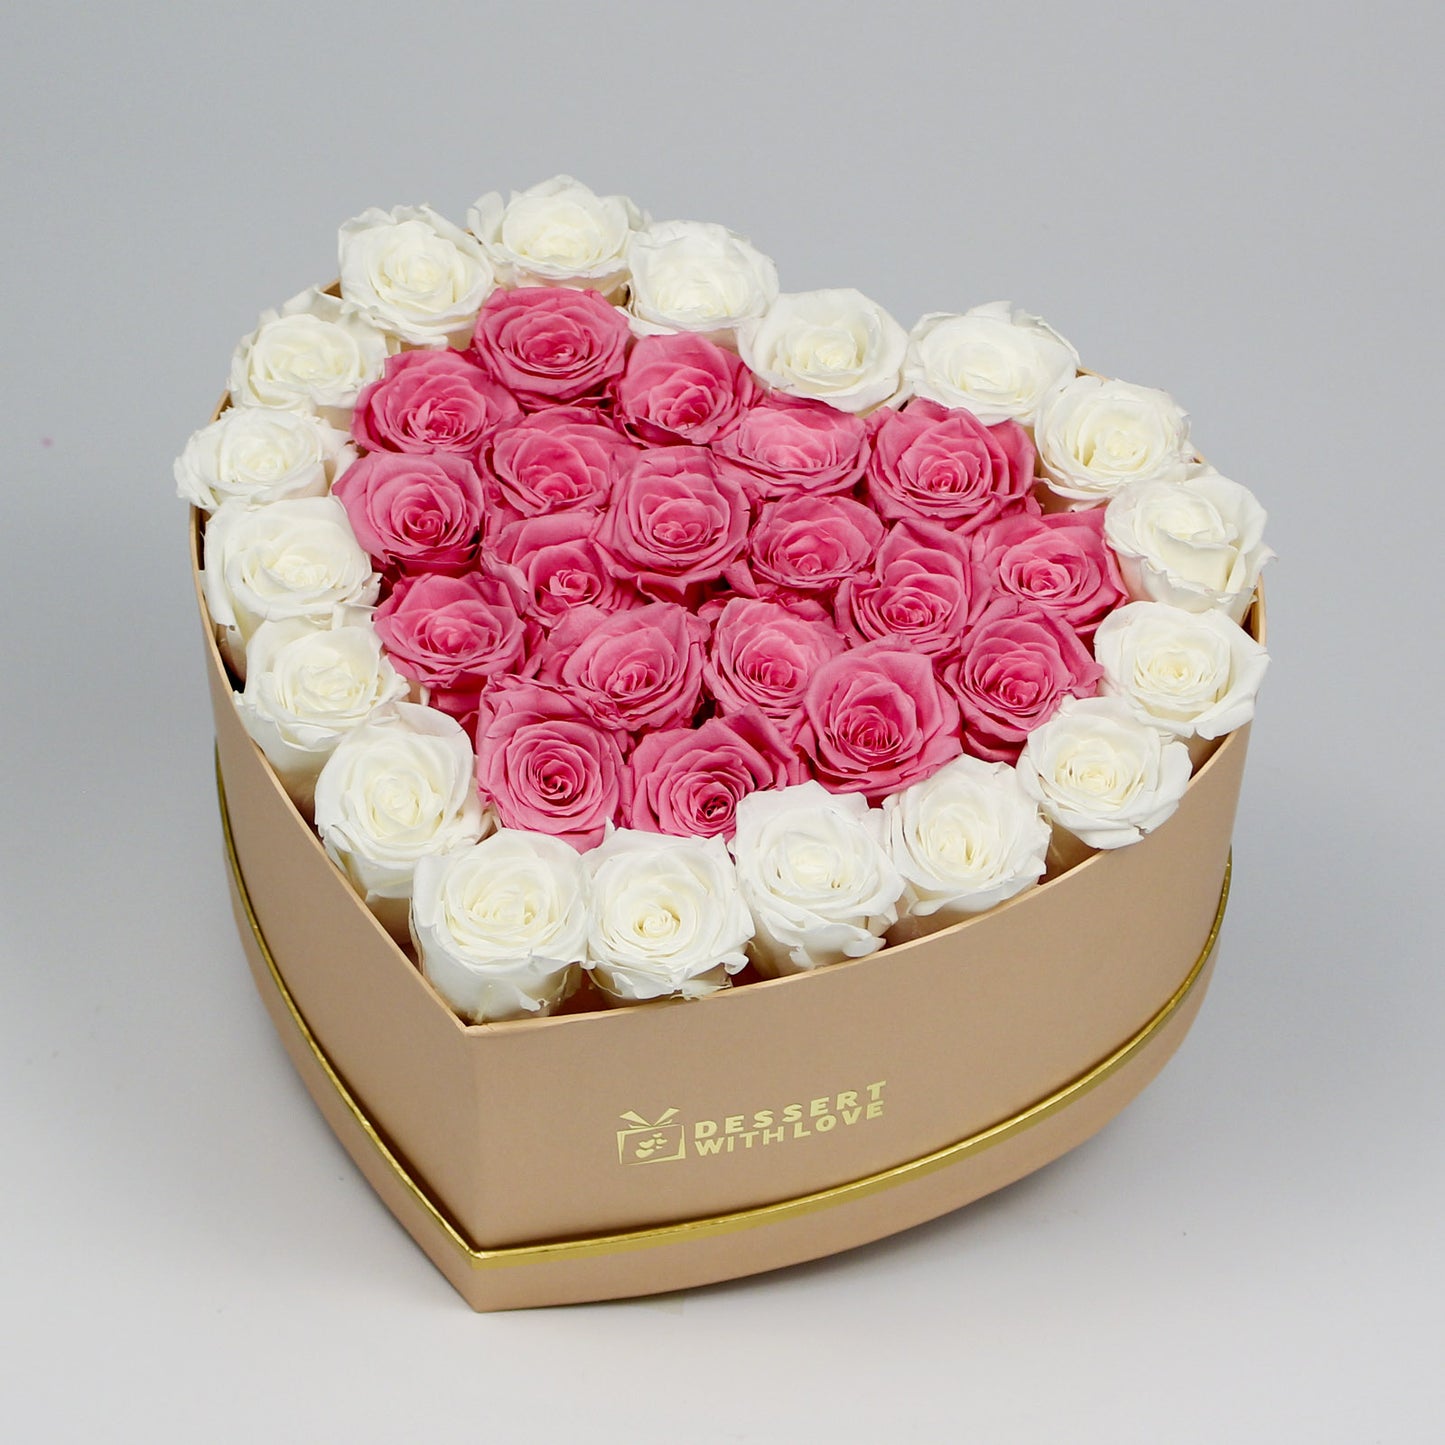 PINK HEART BOX | PINK & WHITE ROSES